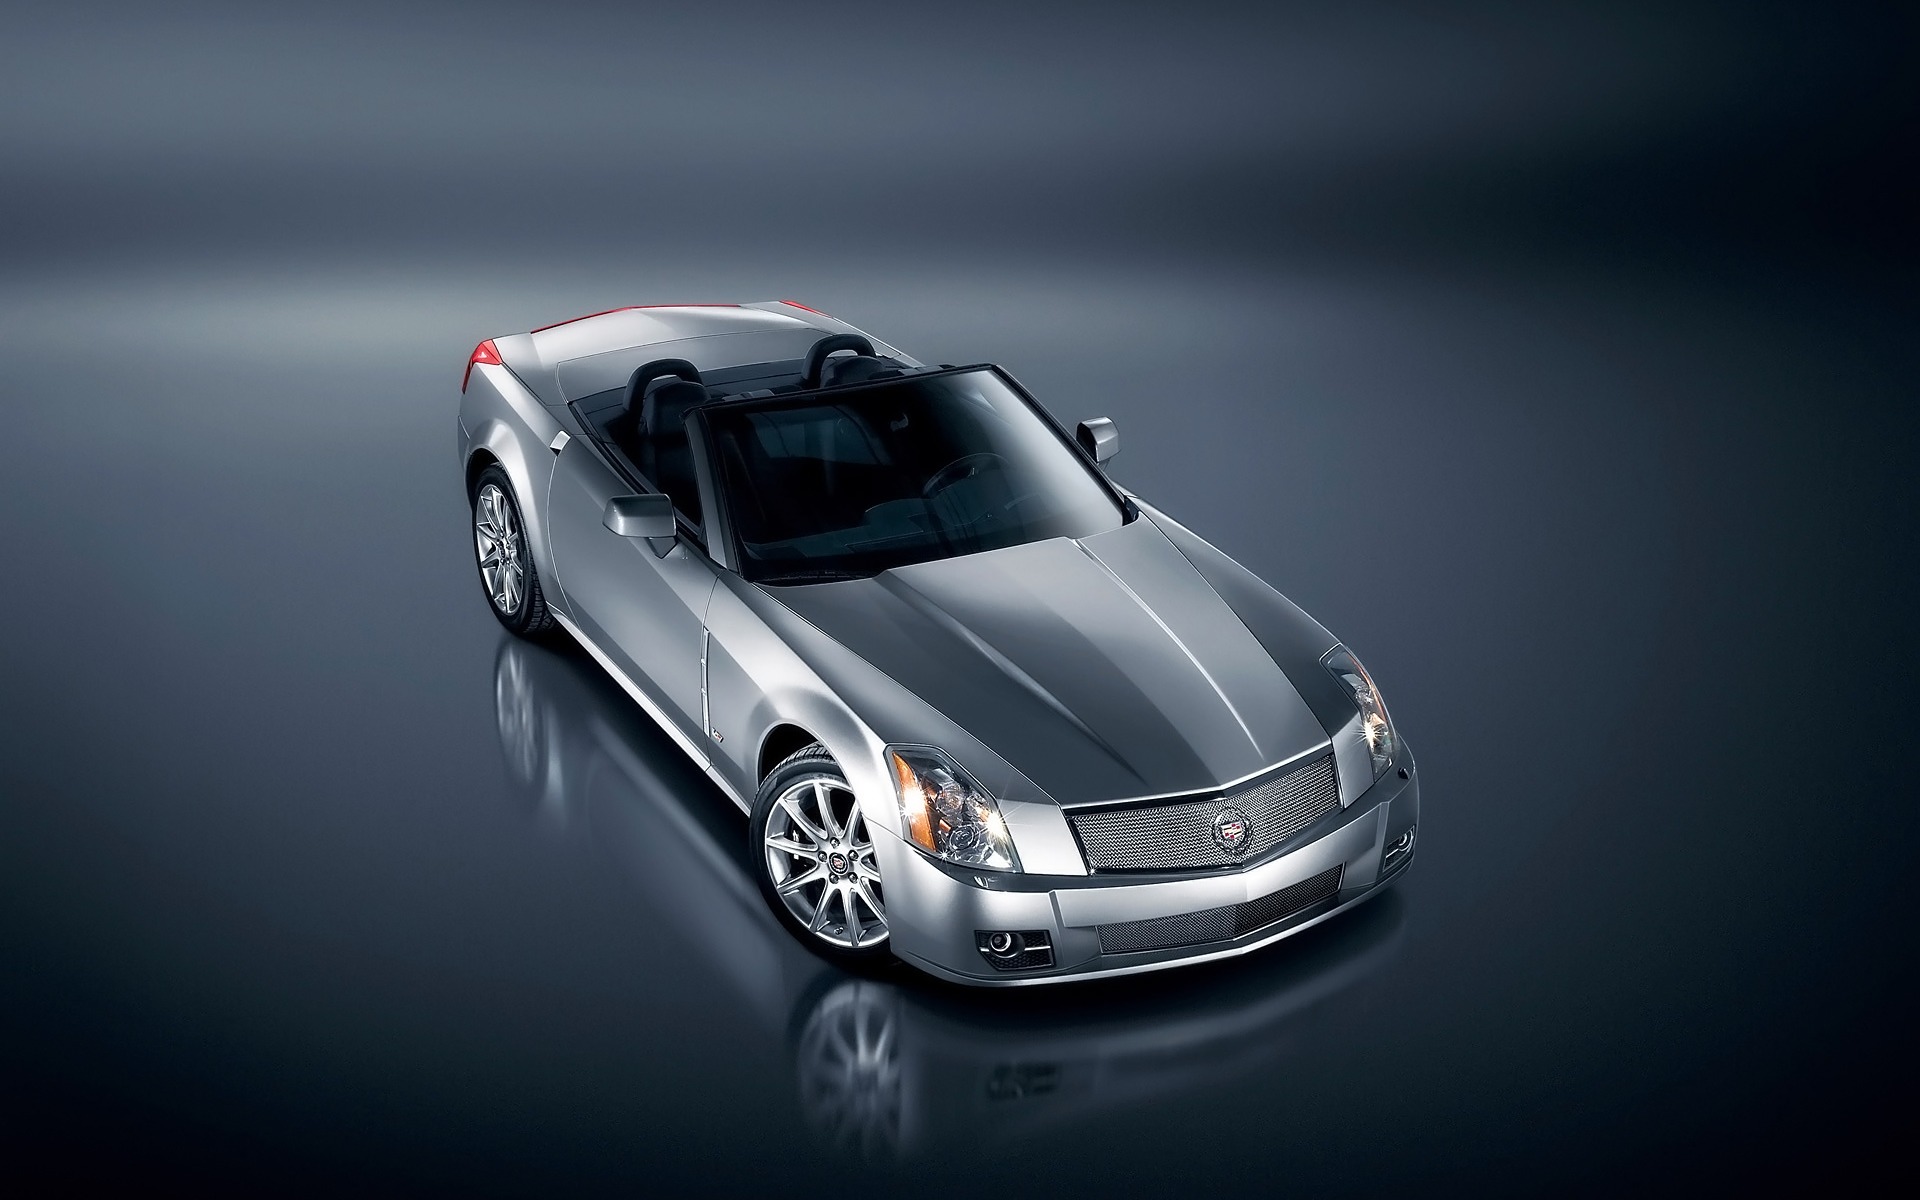 09 Cadillac Xlr V Wallpaper Cadillac Cars Wallpapers In Jpg Format For Free Download